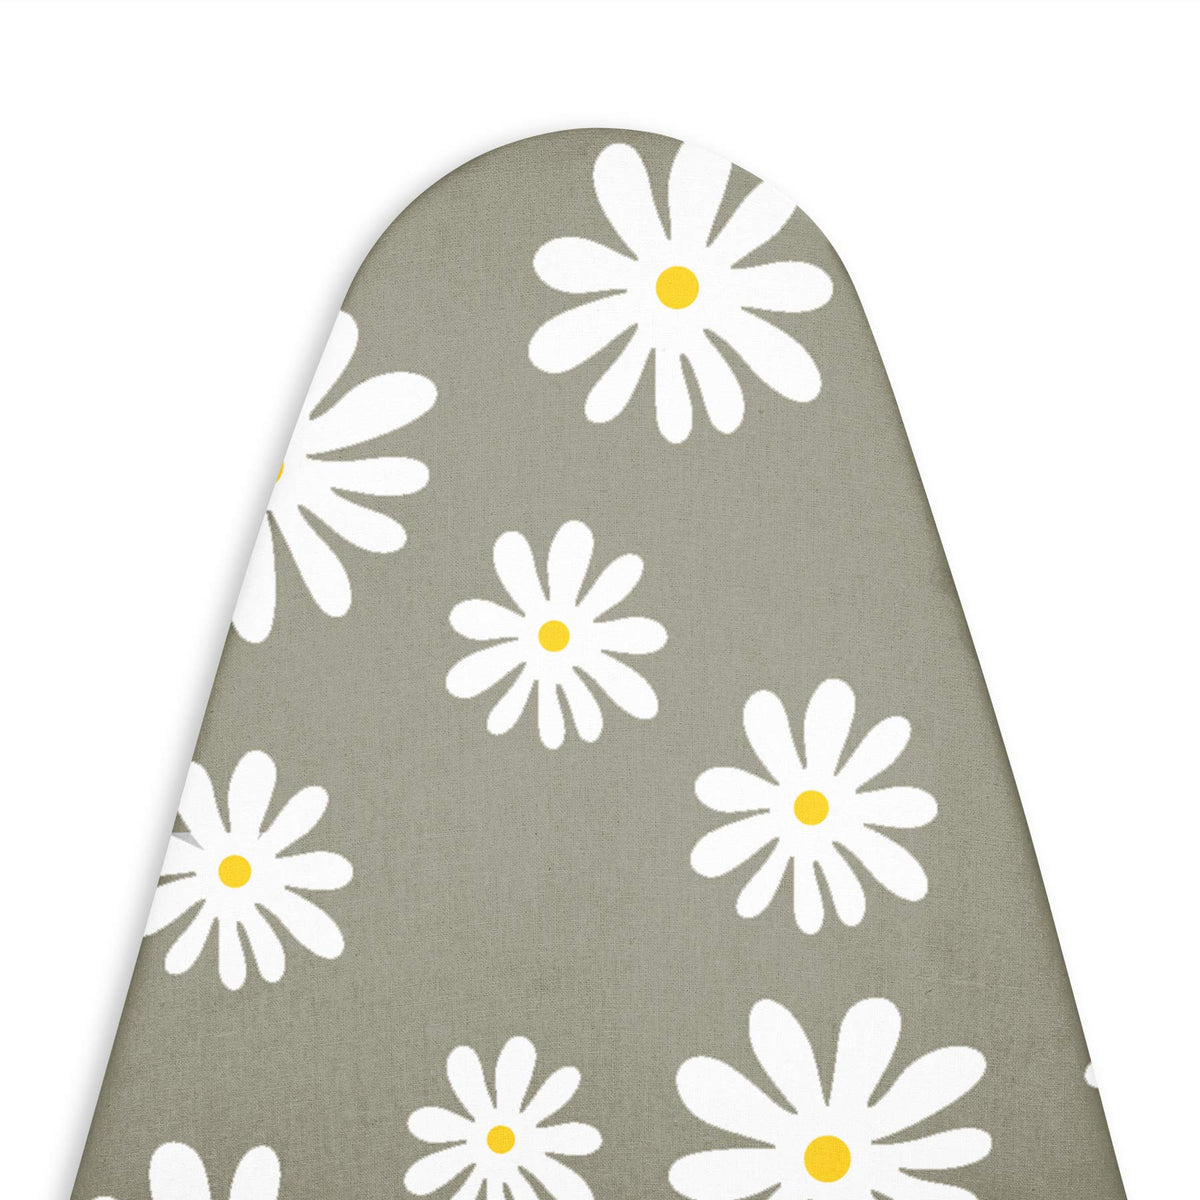 Encasa Homes Ironing Board Cover with 3mm Thick Felt Pad for Steam Press (Fits Standard Large Boards of 125x39 cm) Heat Reflective, Scorch & Stain Resistant, Printed - Daisy Grey